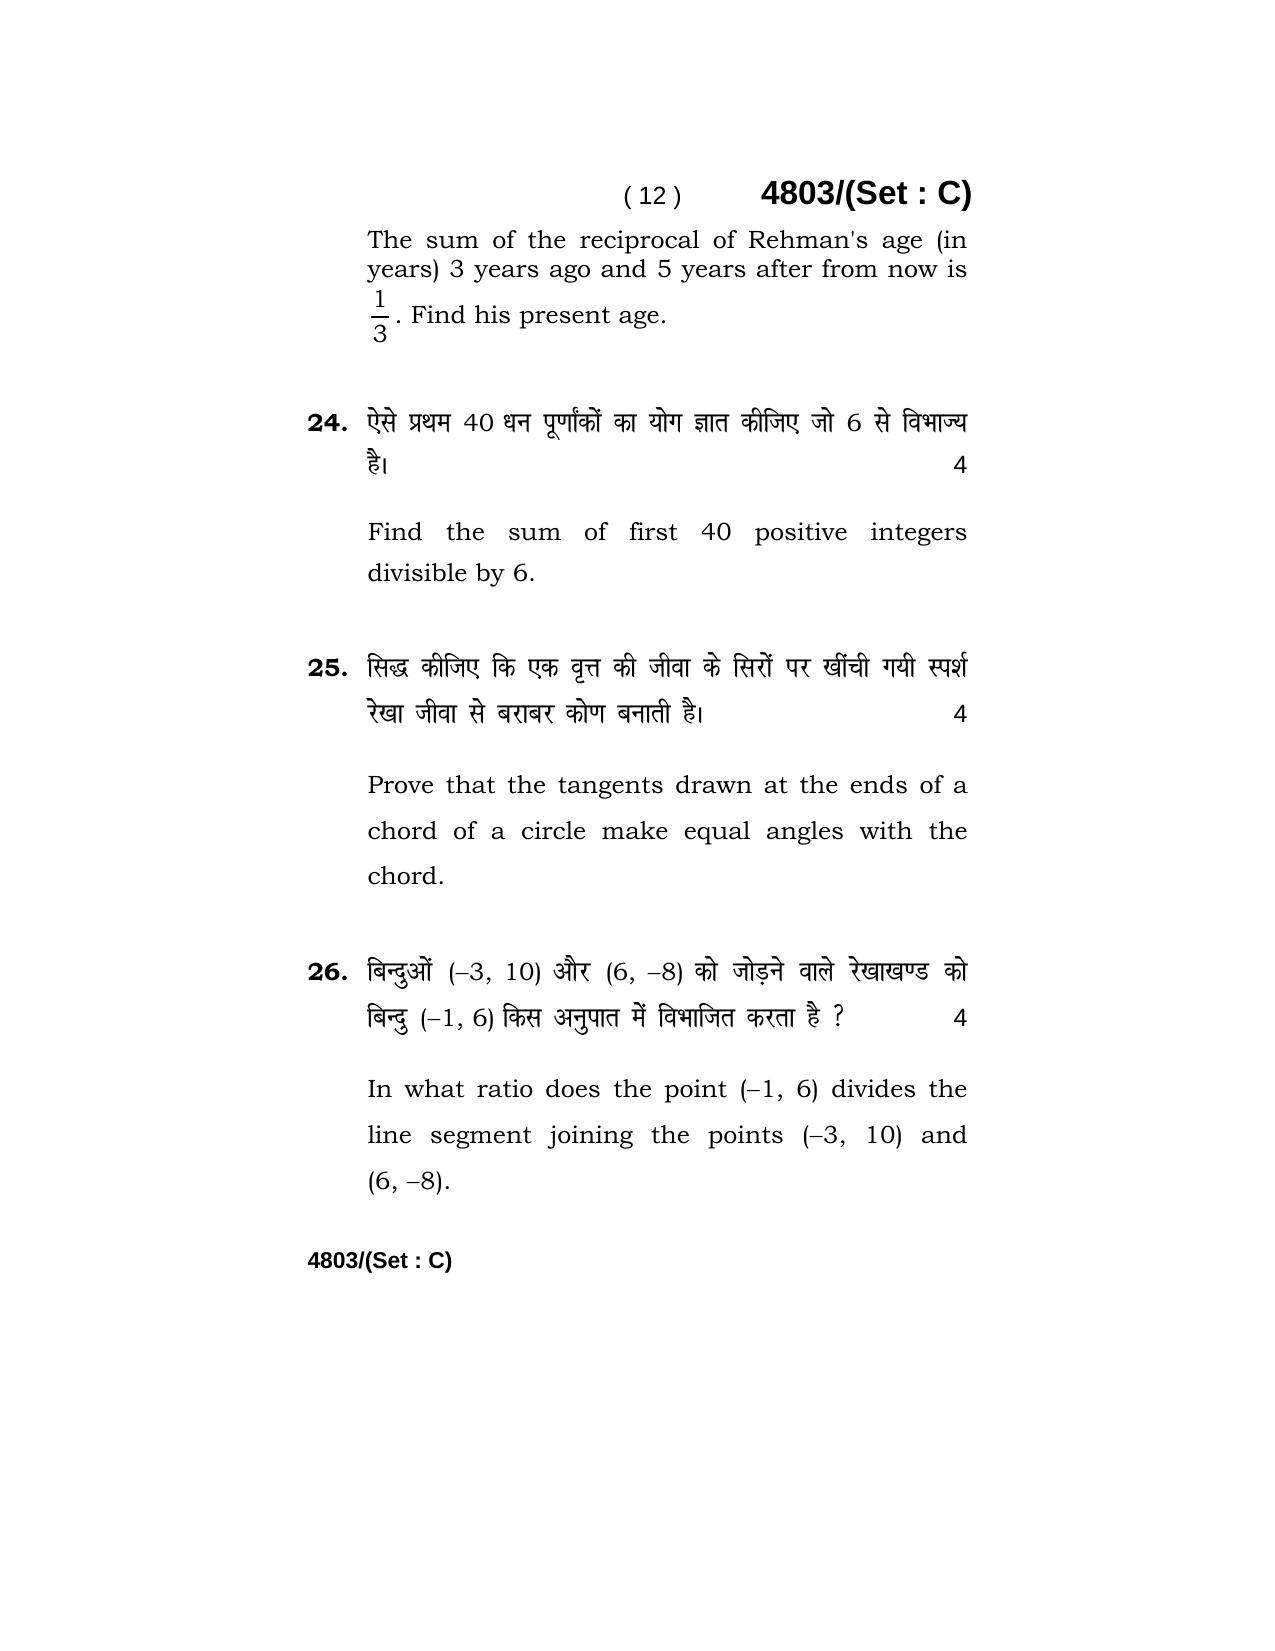 Haryana Board HBSE Class 10 Mathematics 2020 Question Paper - Page 44